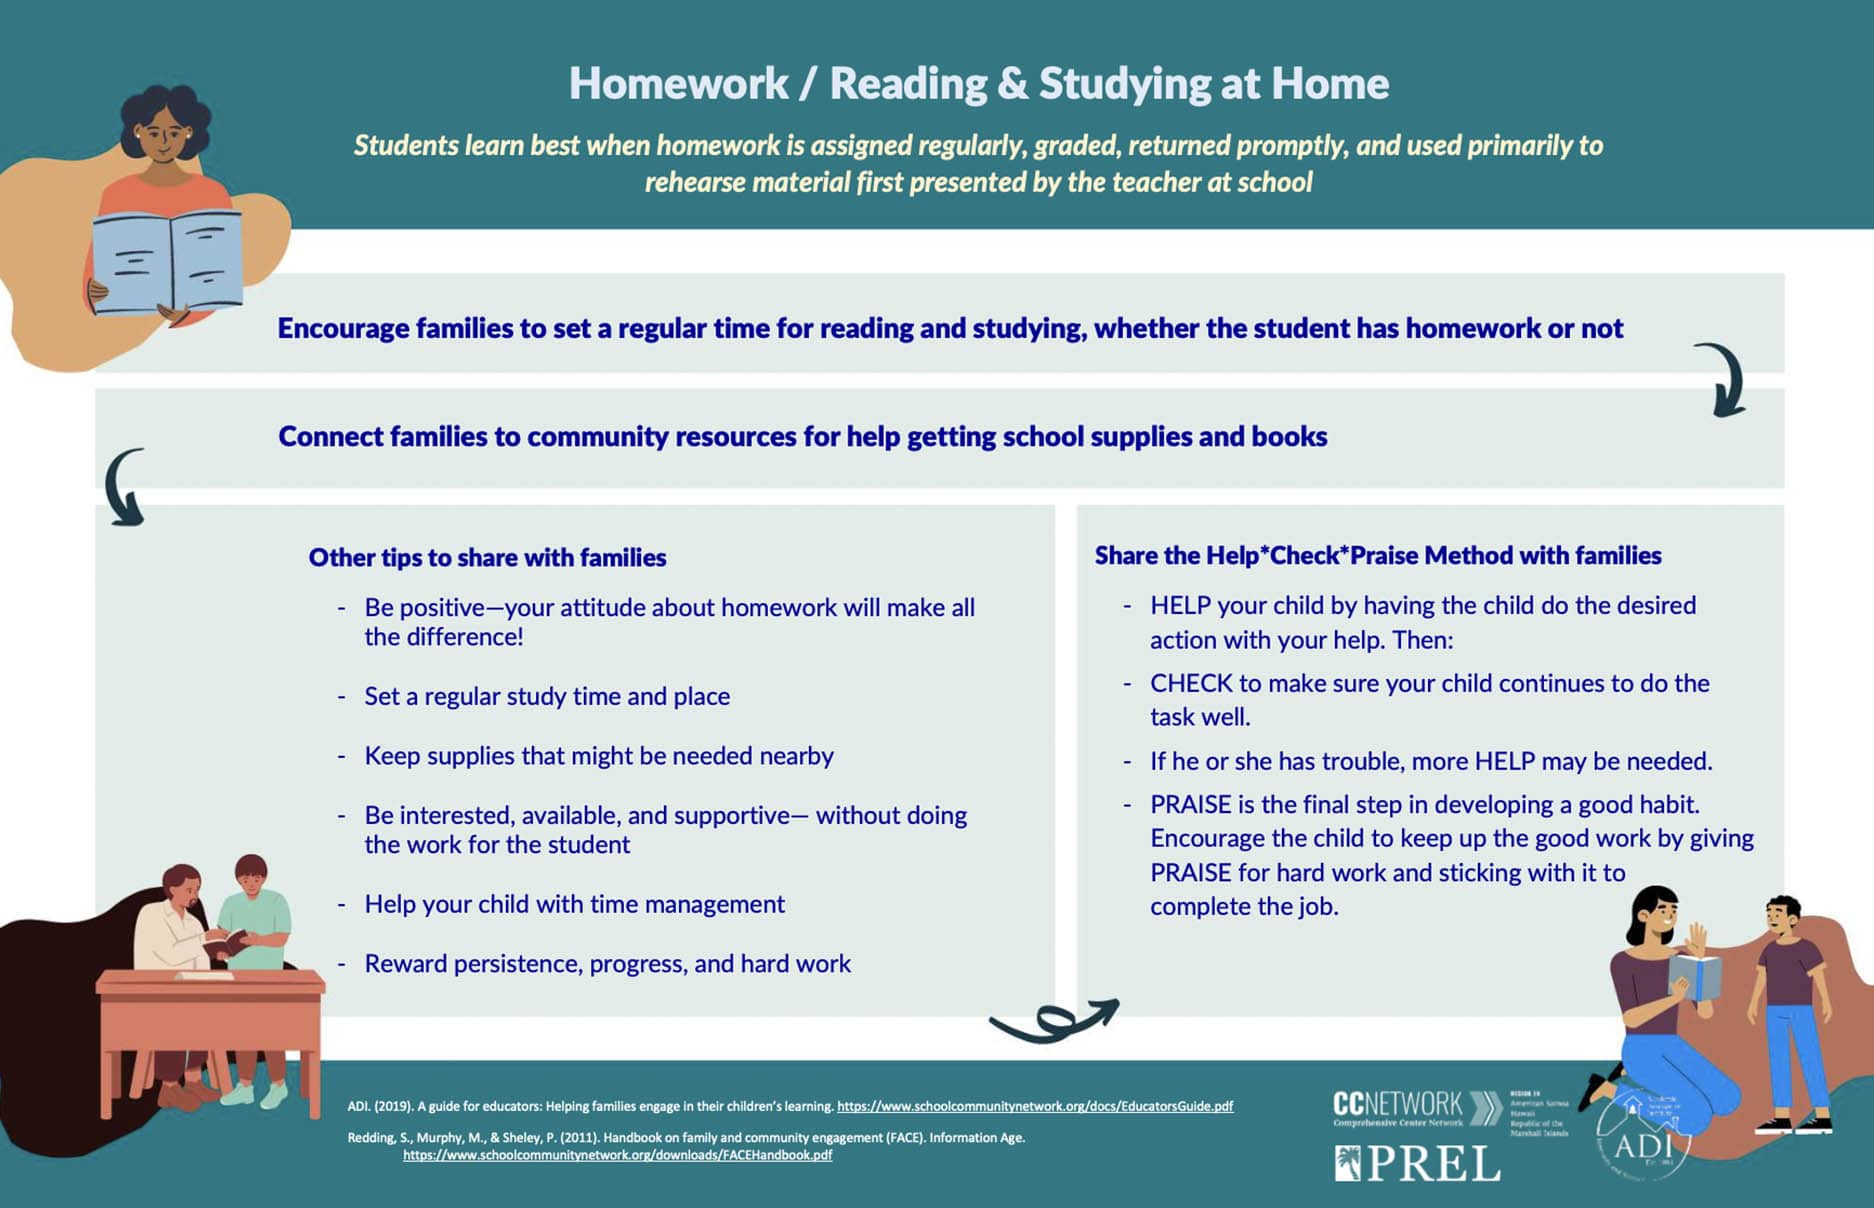 5 Homework Reading & Studying at Home